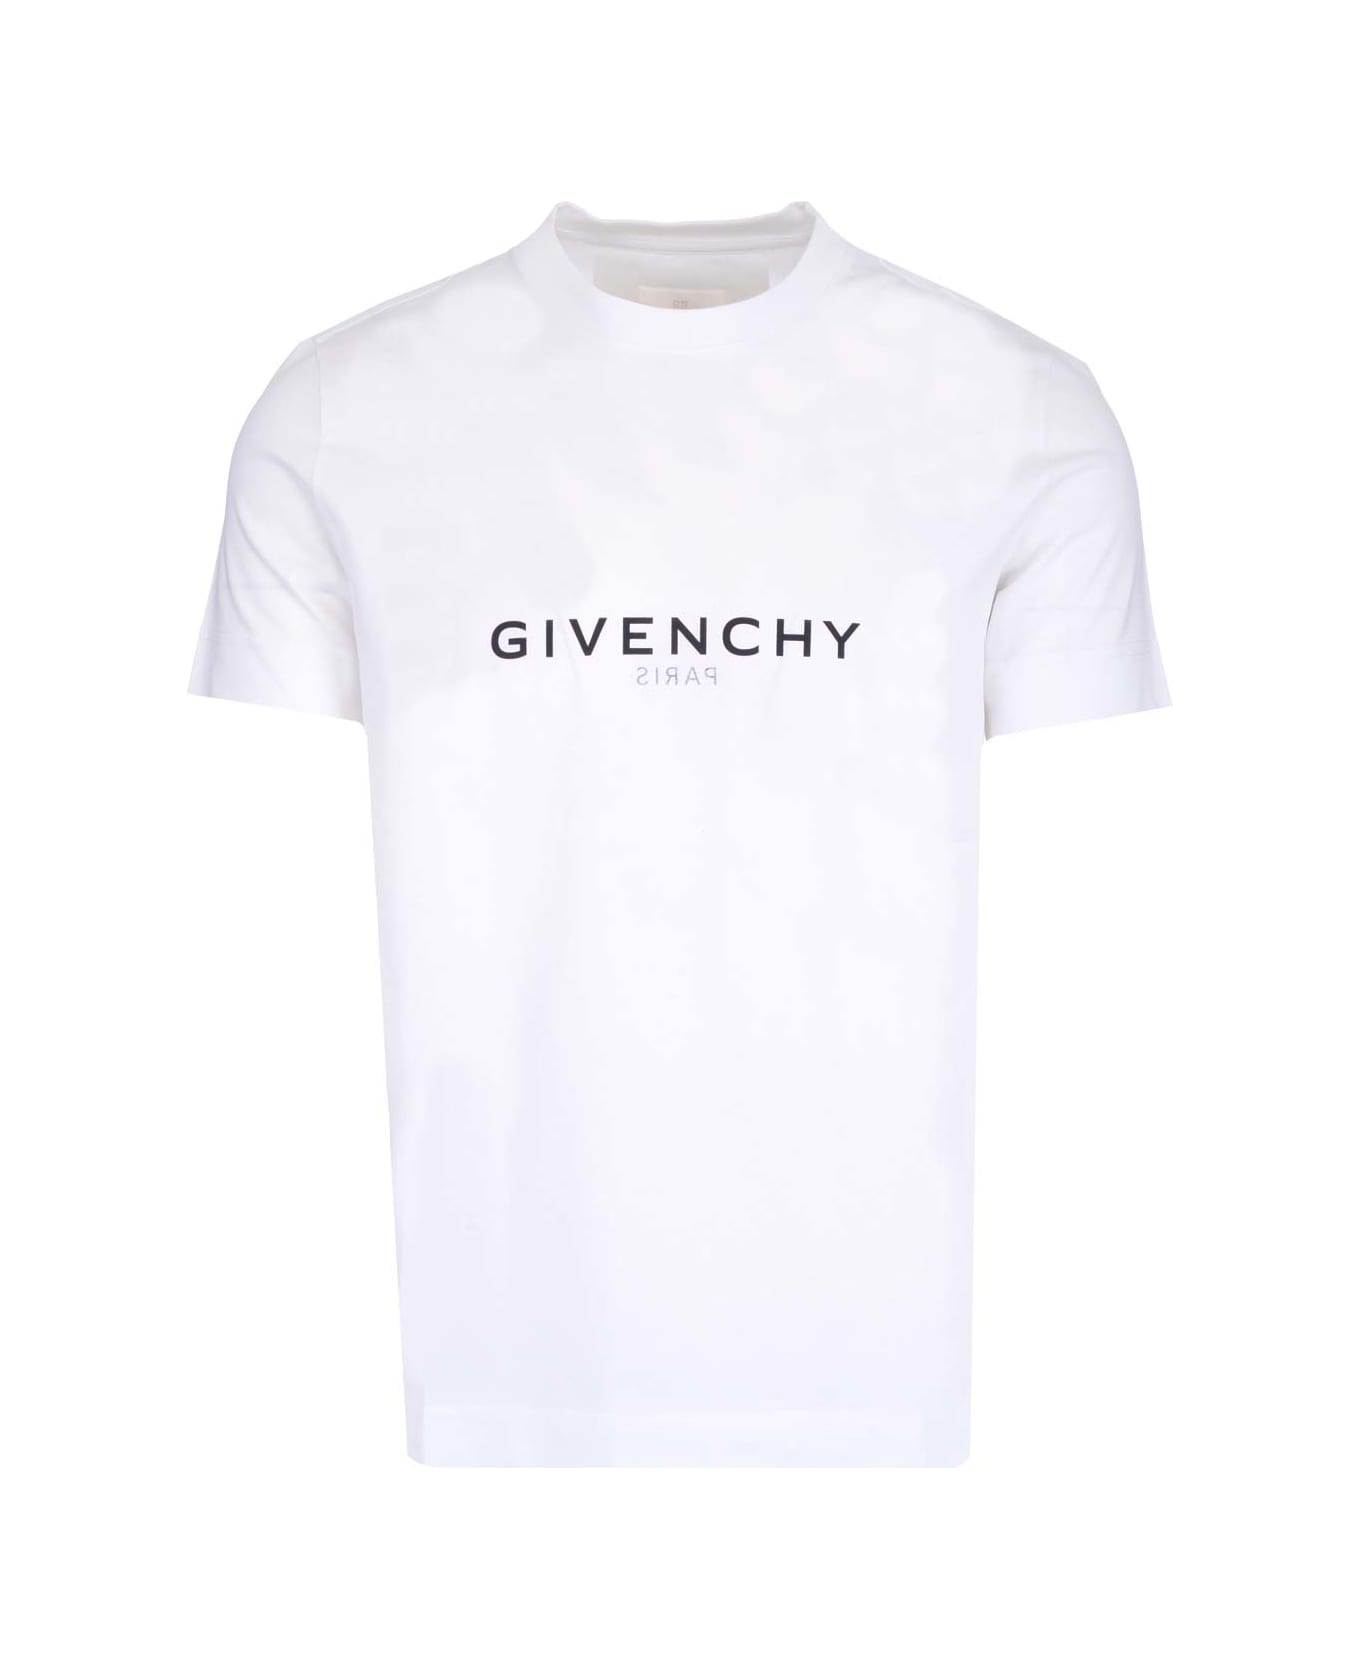 Givenchy Reverse T-shirt - White シャツ